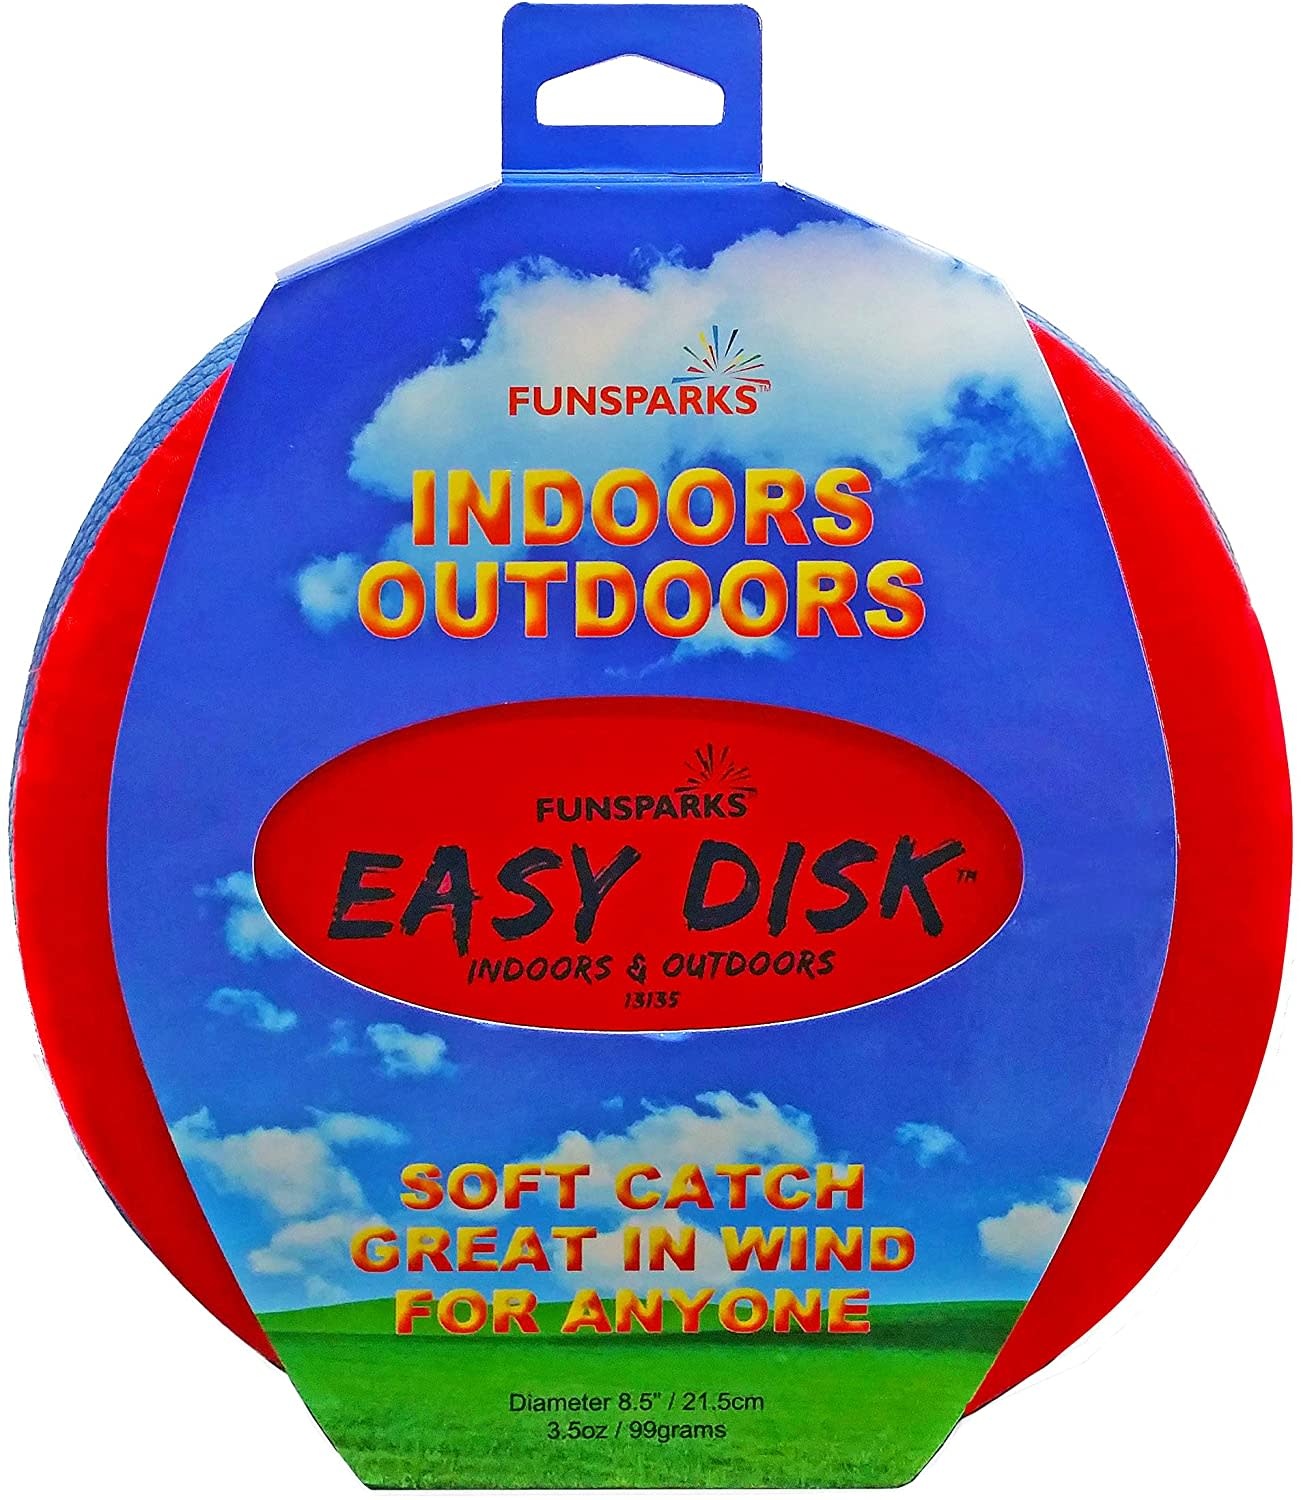 Easy Disk by Funsparks